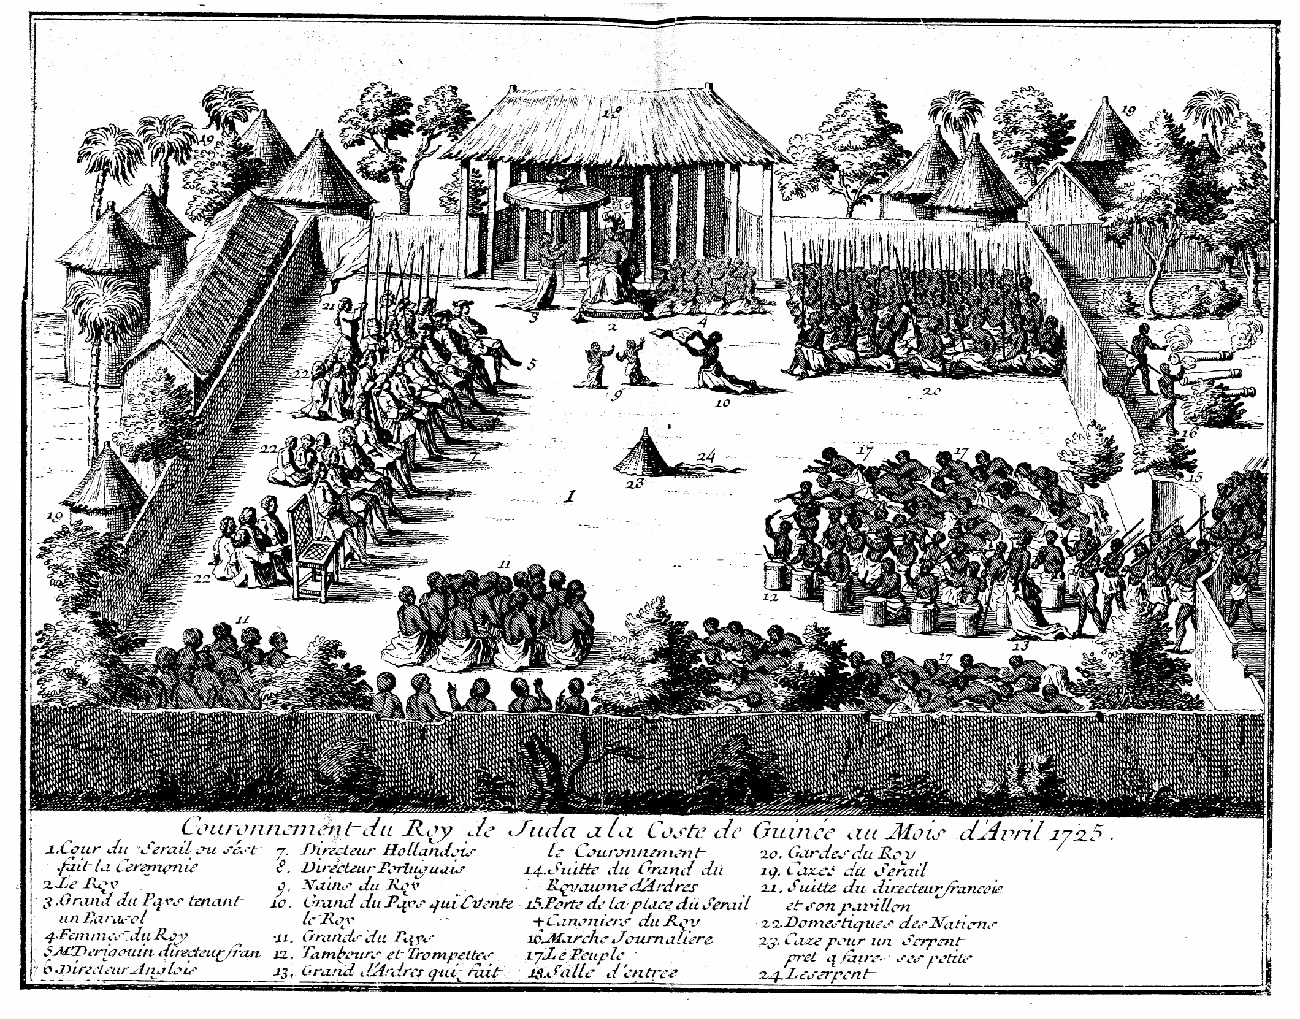 This image shows several groups of people surrounded by a fence. In the back center, there is a large covered platform. A man sits in front of it. Another man stands on his right and holds a parasol over him. A group of people sit on the ground on his left and gaze up at him. In the far right corner, a group of people sit on the ground and hold spears. In the bottom right corner, there is another group of people. Some of them lie prostrate. Others play instruments and drums. Beside them through an opening in the fence, people march in carrying rifles. In the bottom left corner, a group of people sit on the ground and face the man sitting on a chair in the background. Along the left side of the fence, many people dressed in European clothes sit in chairs. Others stand and hold flags. In the center of the fenced area is a snake, two children on their knees, and a man kneeling, holding a piece of paper. Outside the fence are several trees and houses. Some people sit on chairs and others are on the ground. Several people stand near cannons and carry weapons.